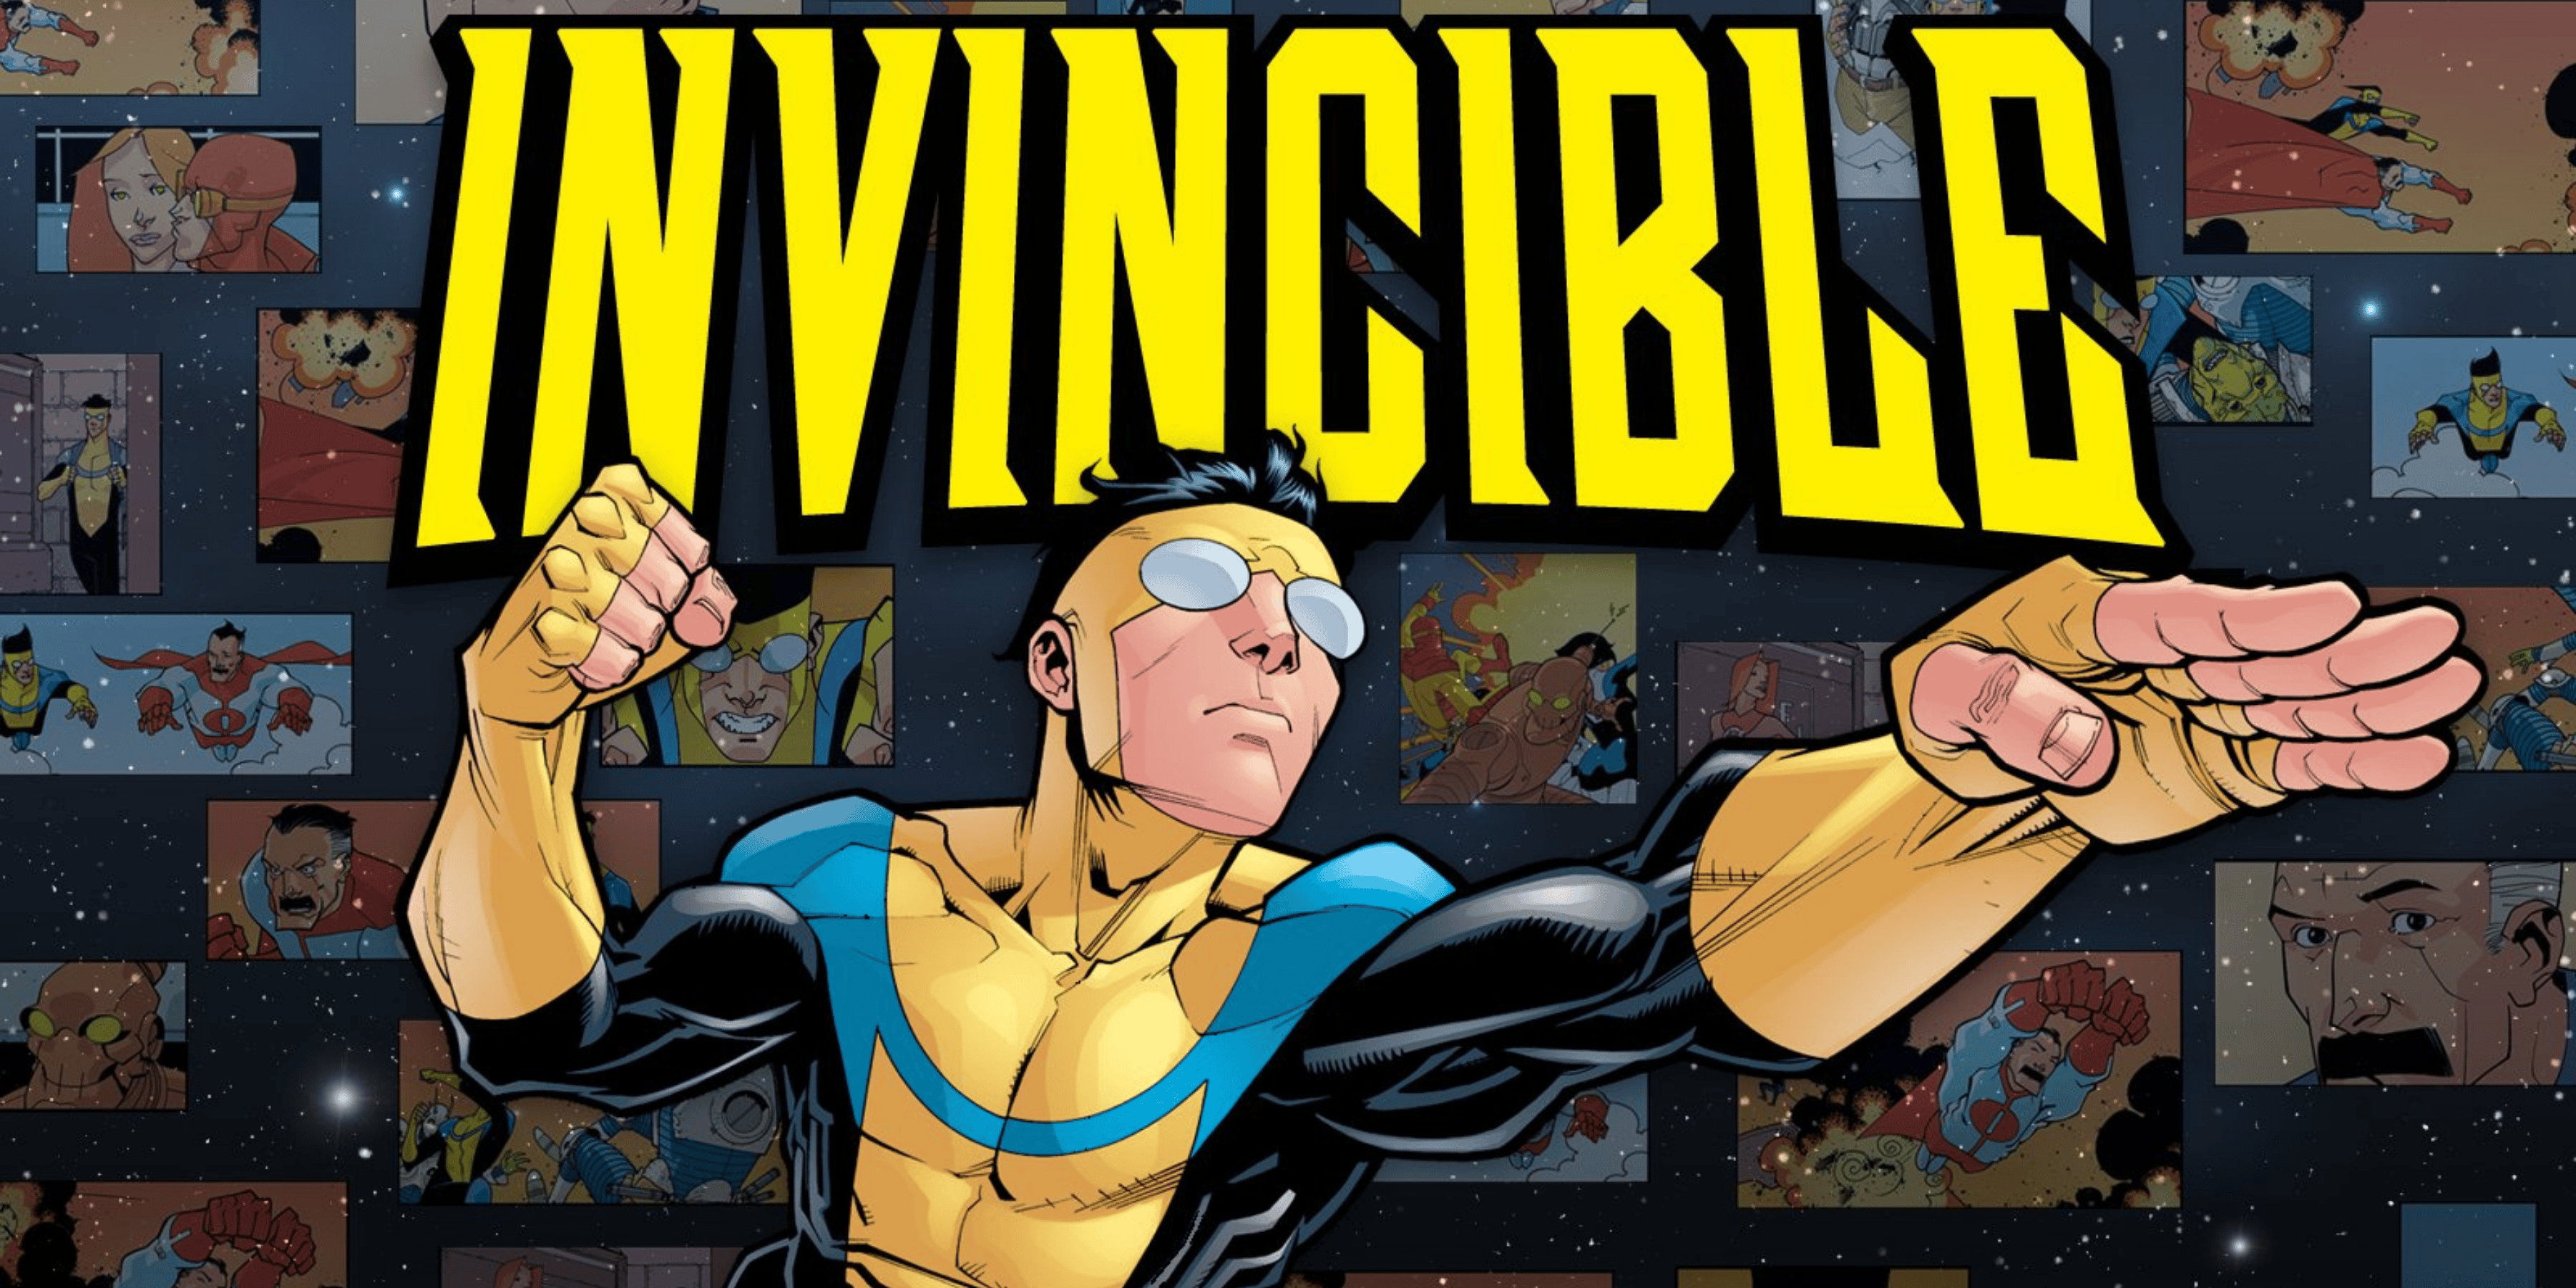 Latest ‘Invincible’ – 2021 on Amazon Prime Video makes a place for itself in Acclaimed Superhero Category